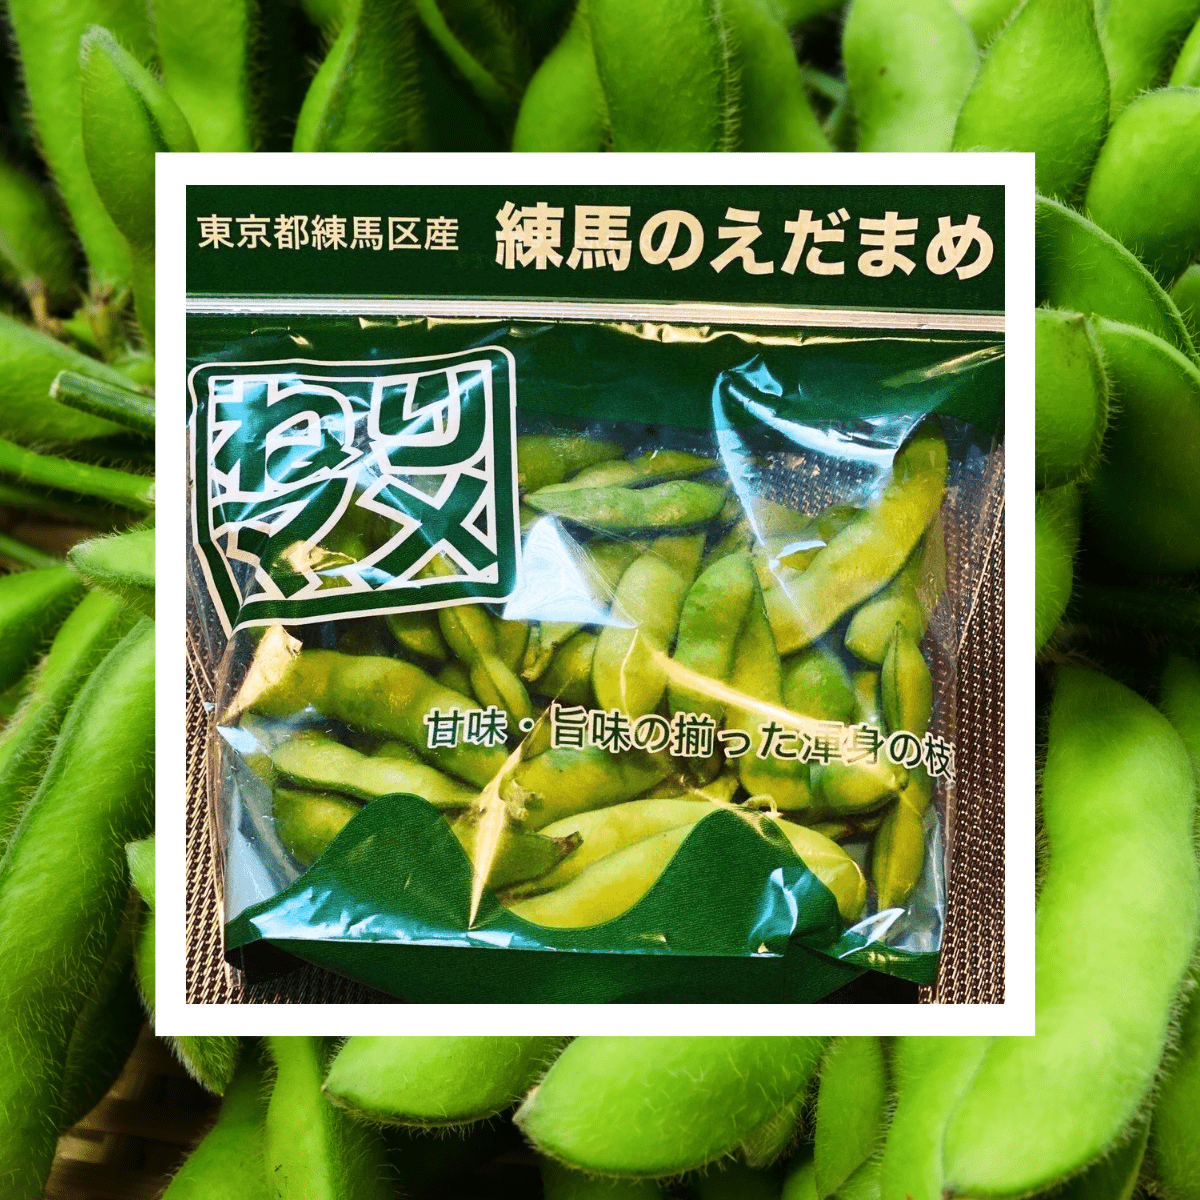 Nerimame 4packs set _ Excellent edamame [12 - 13th July Delivery] - Tokyo Fresh Direct